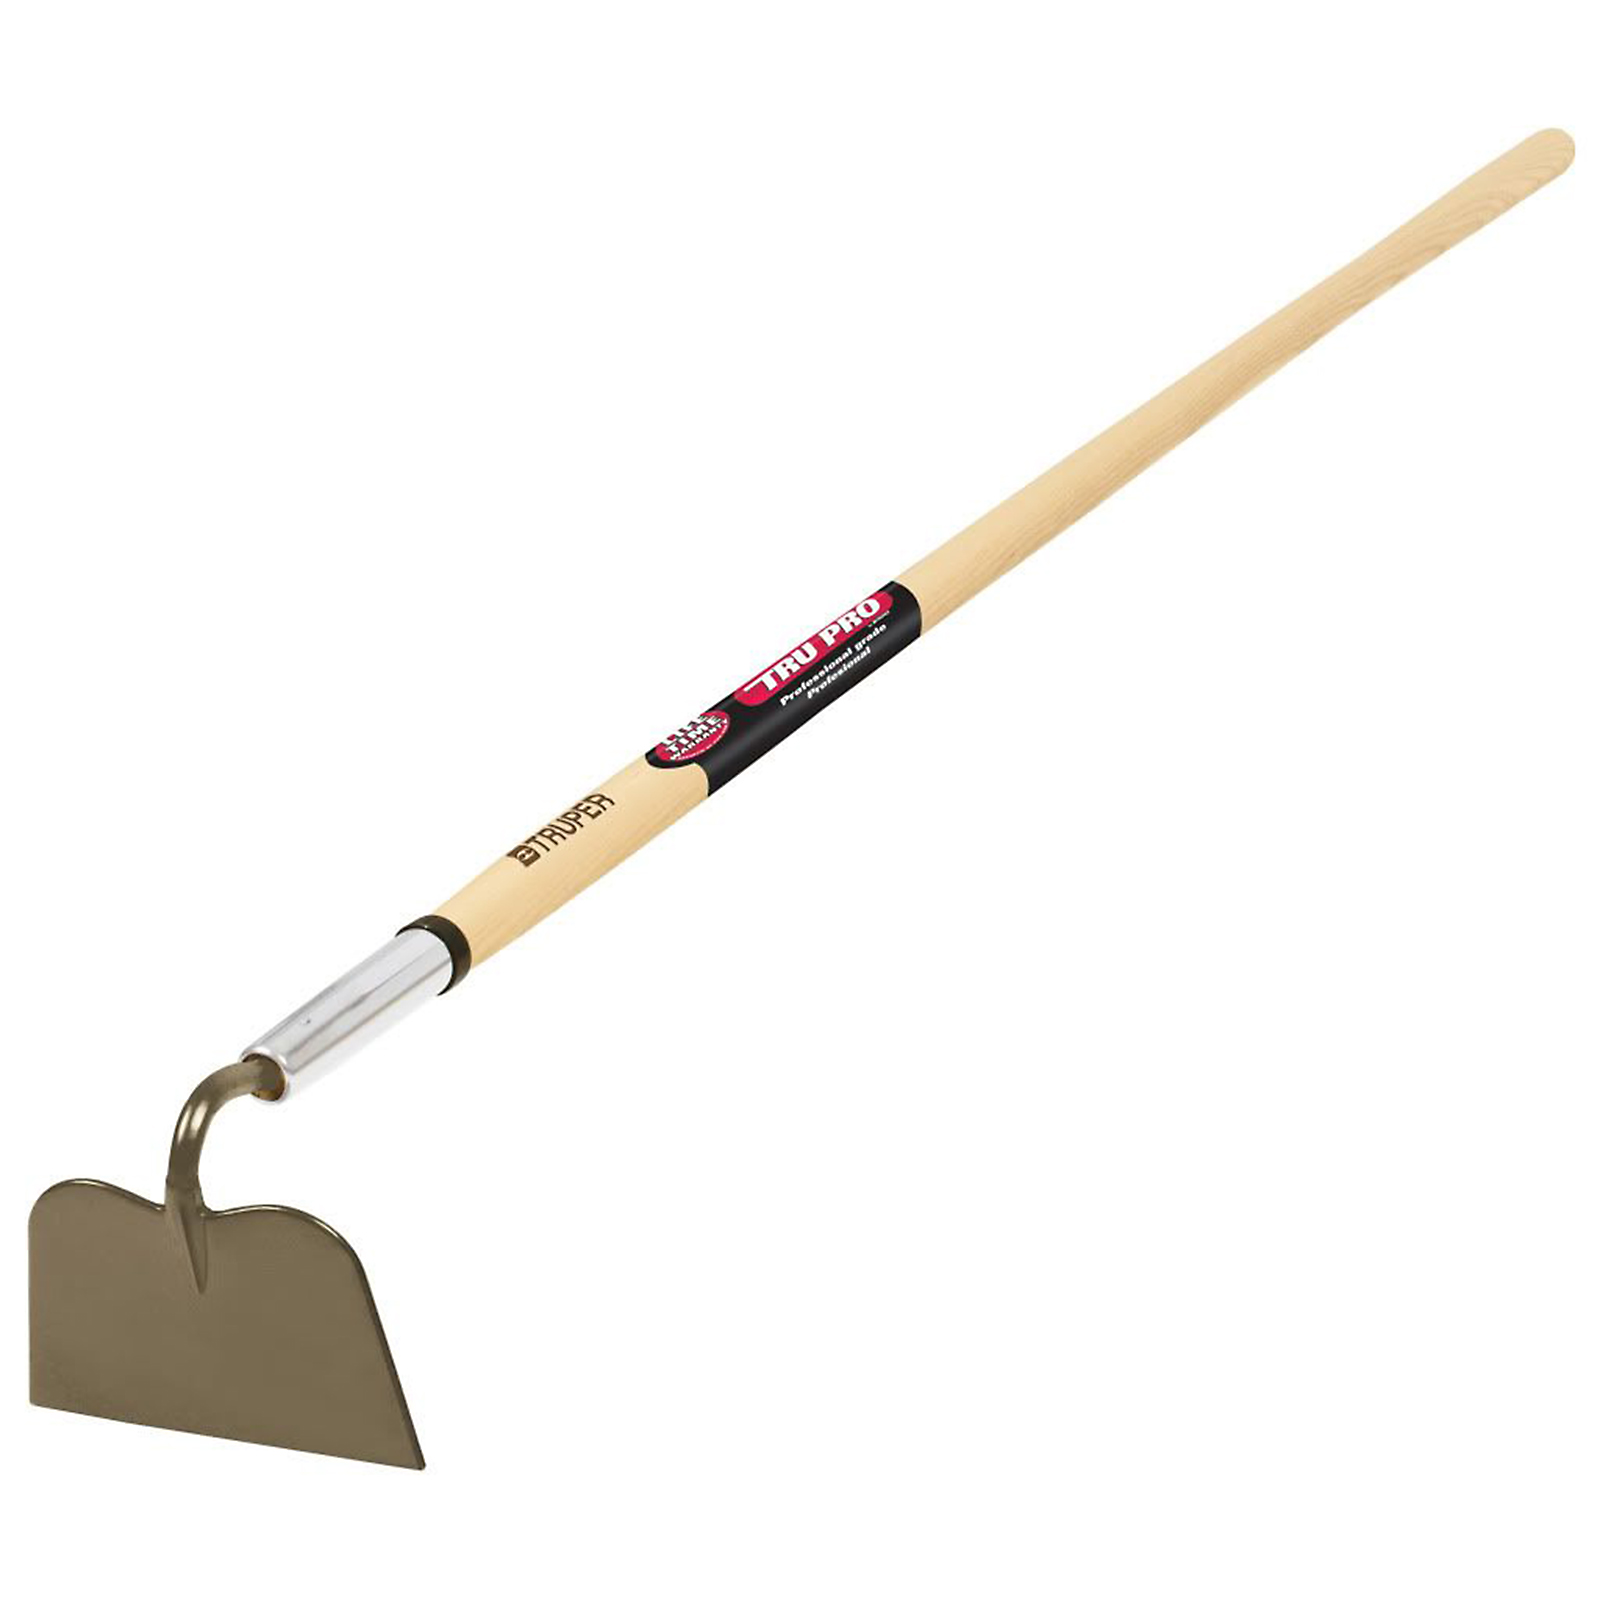 Truper TRP30018 Hoe with 6-inch Forged Head